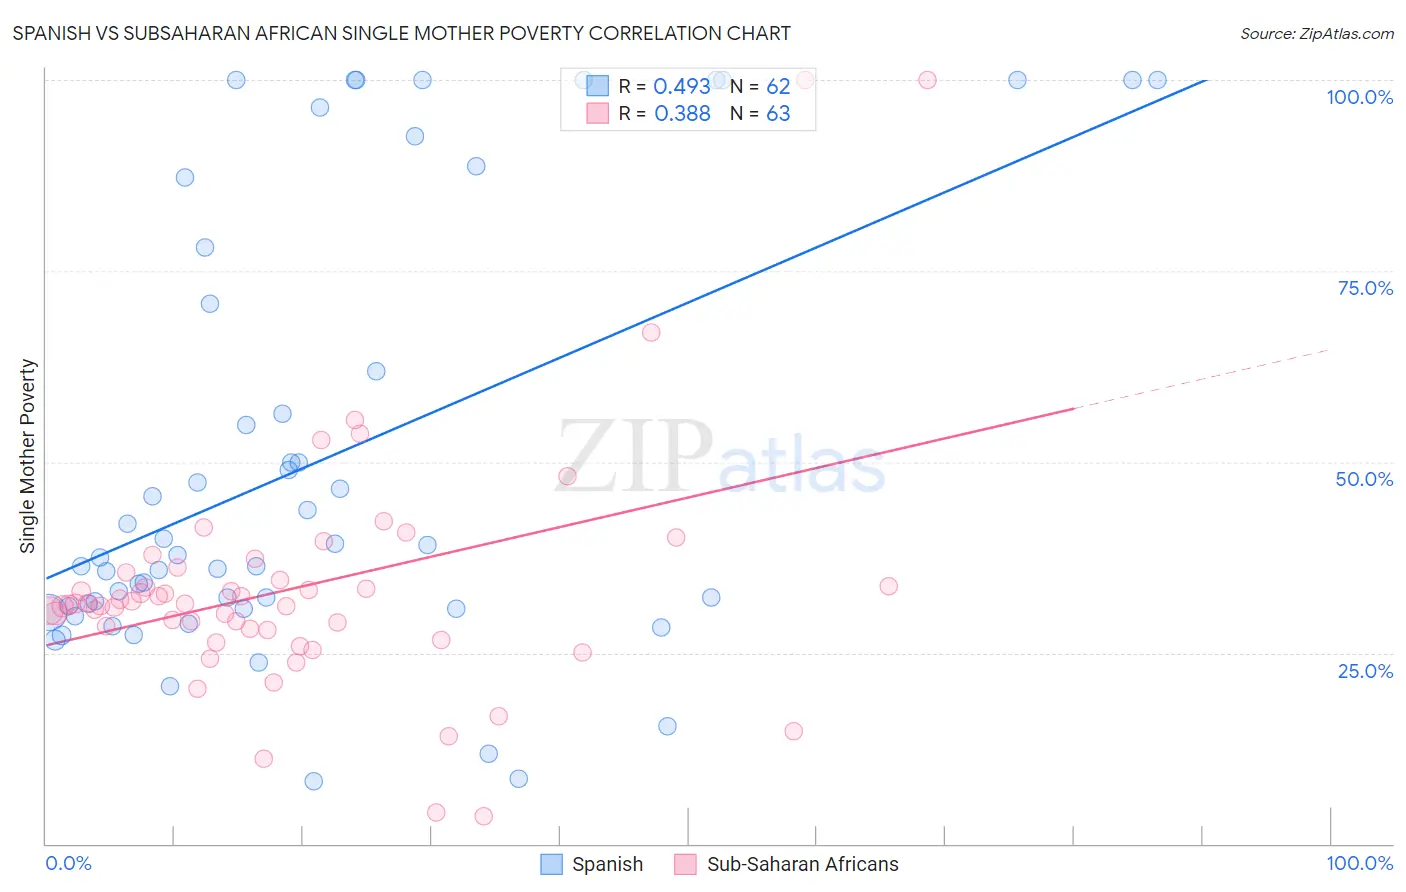 Spanish vs Subsaharan African Single Mother Poverty